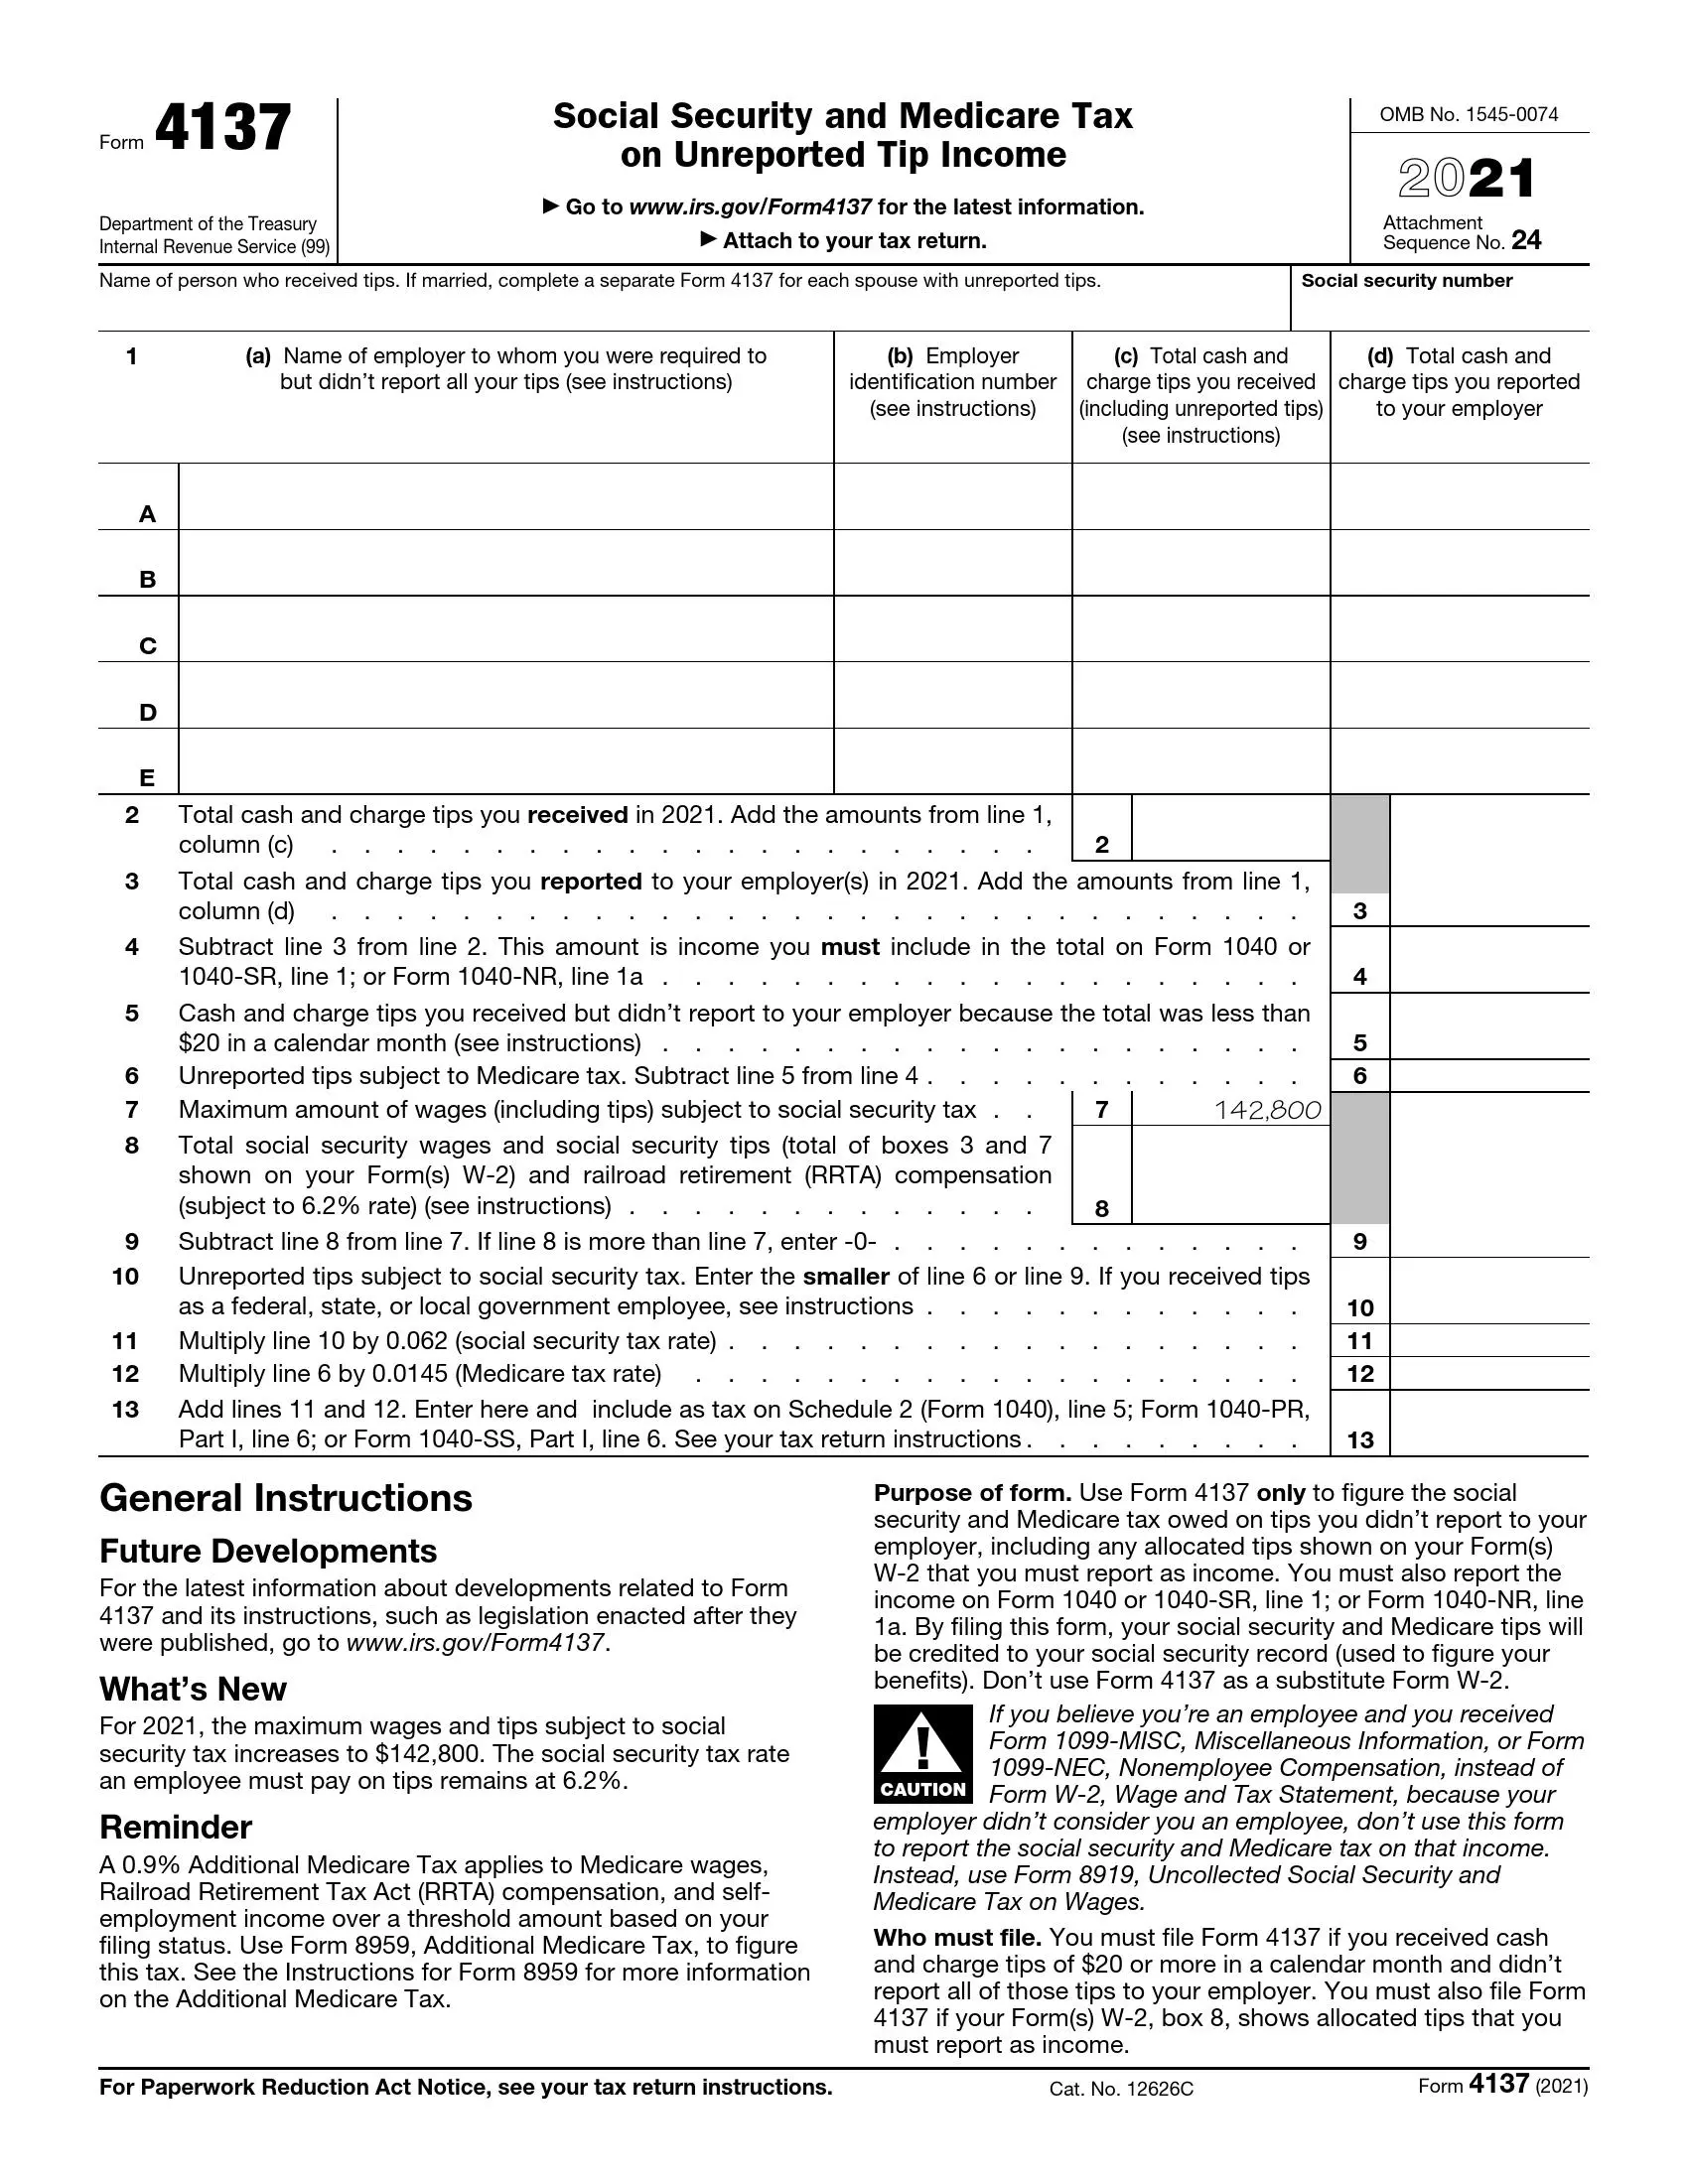 irs form 4137 2021 preview